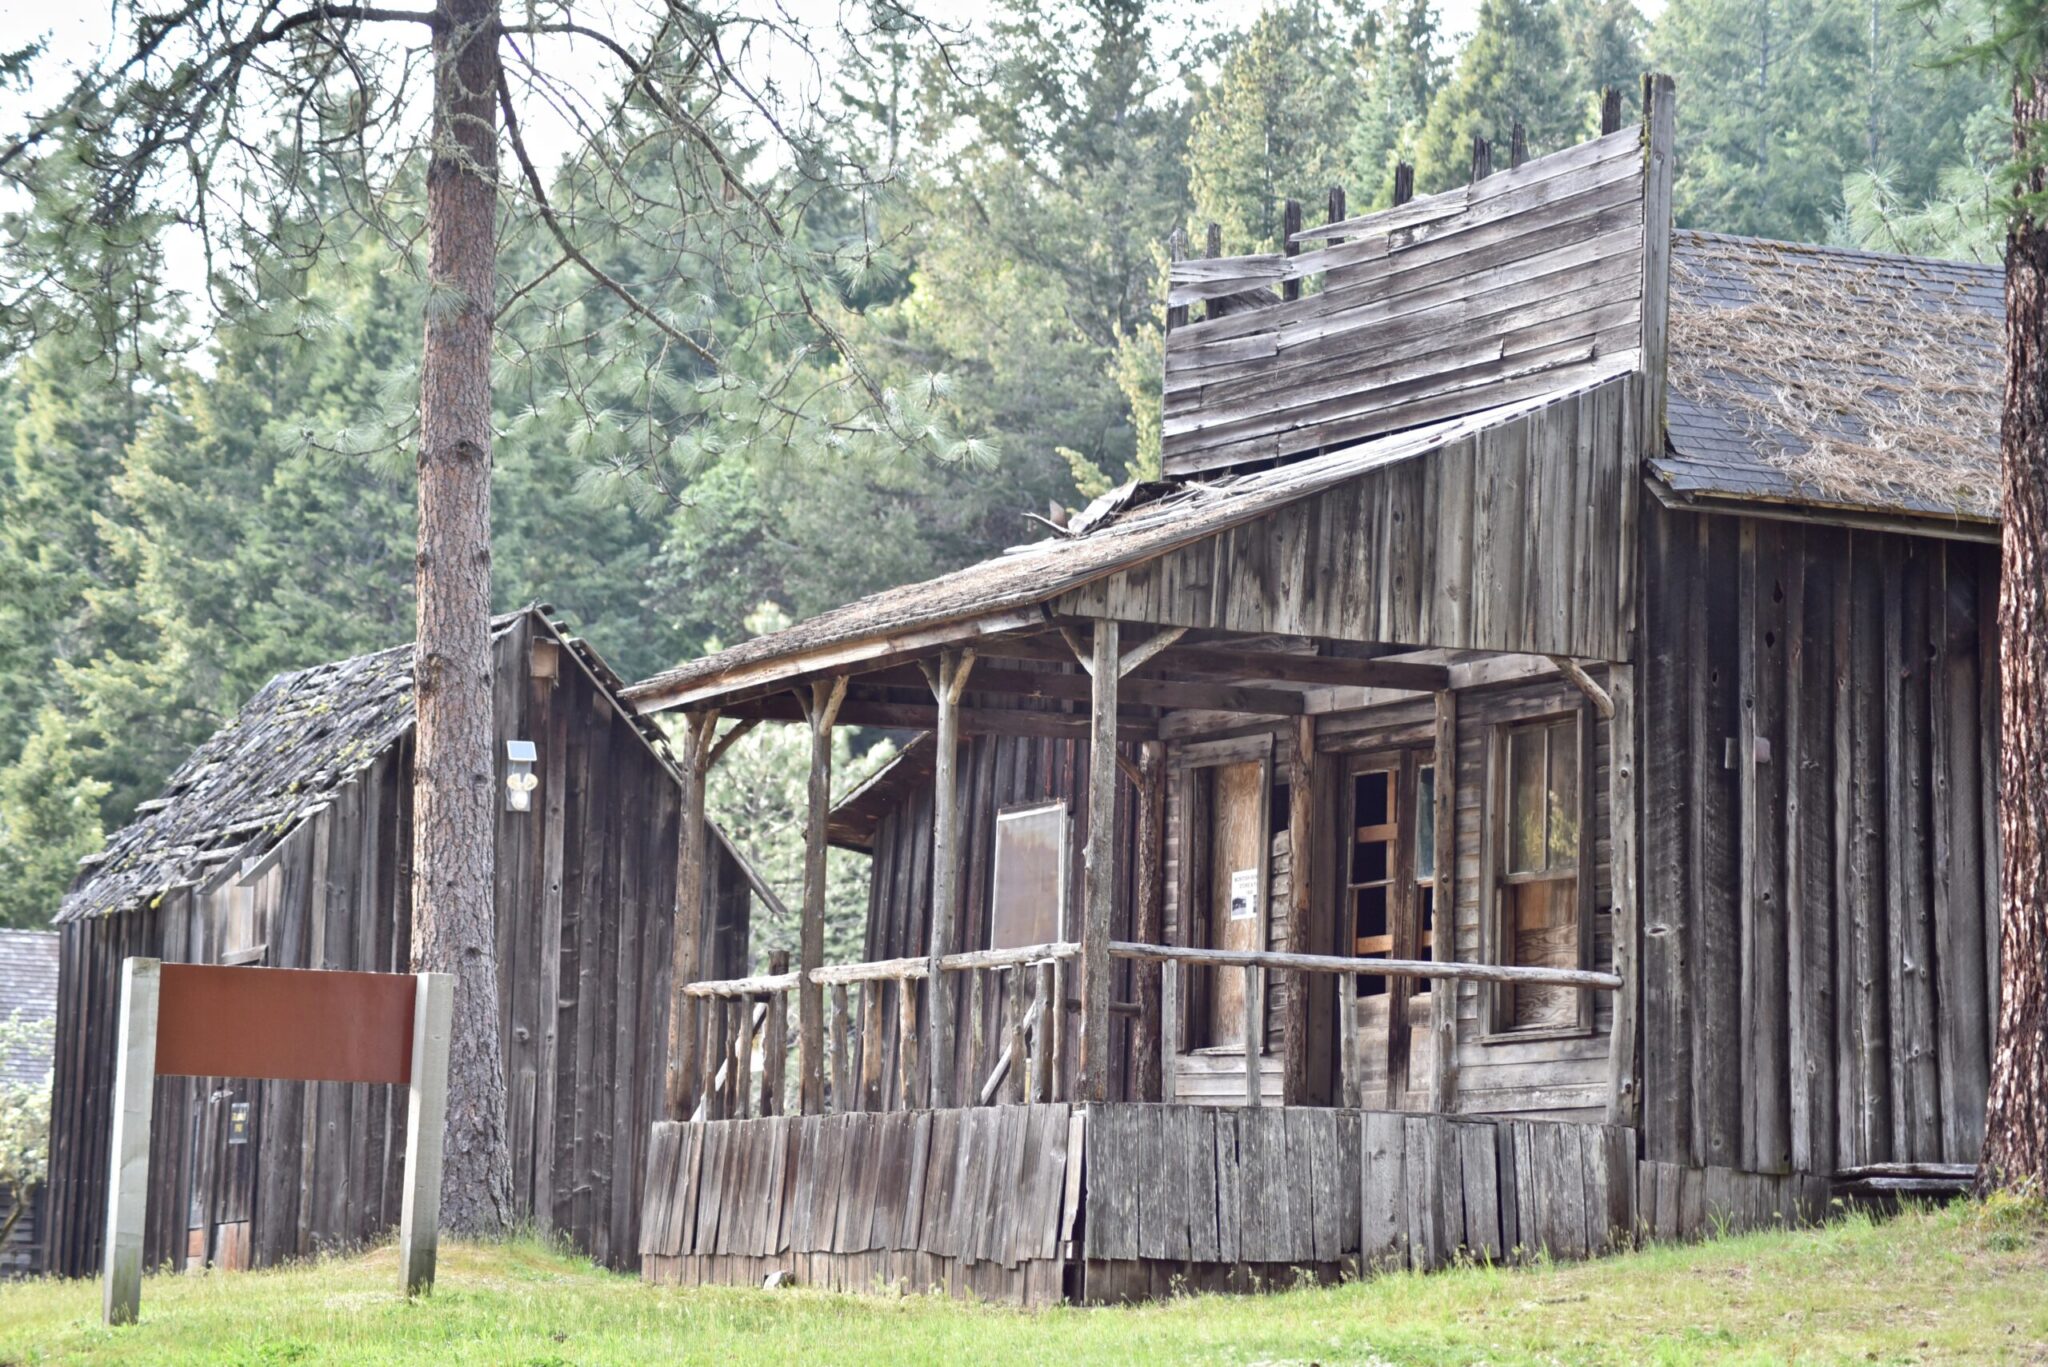 Side glimpse at the ghost town in Southern Oregon, focusing on a small abandoned store with the old square sign in front of the roof and the porch protruding out the front. To the left of the building, there is a tree, and behind it, a smaller structure appears to be a tiny wooden outhouse.